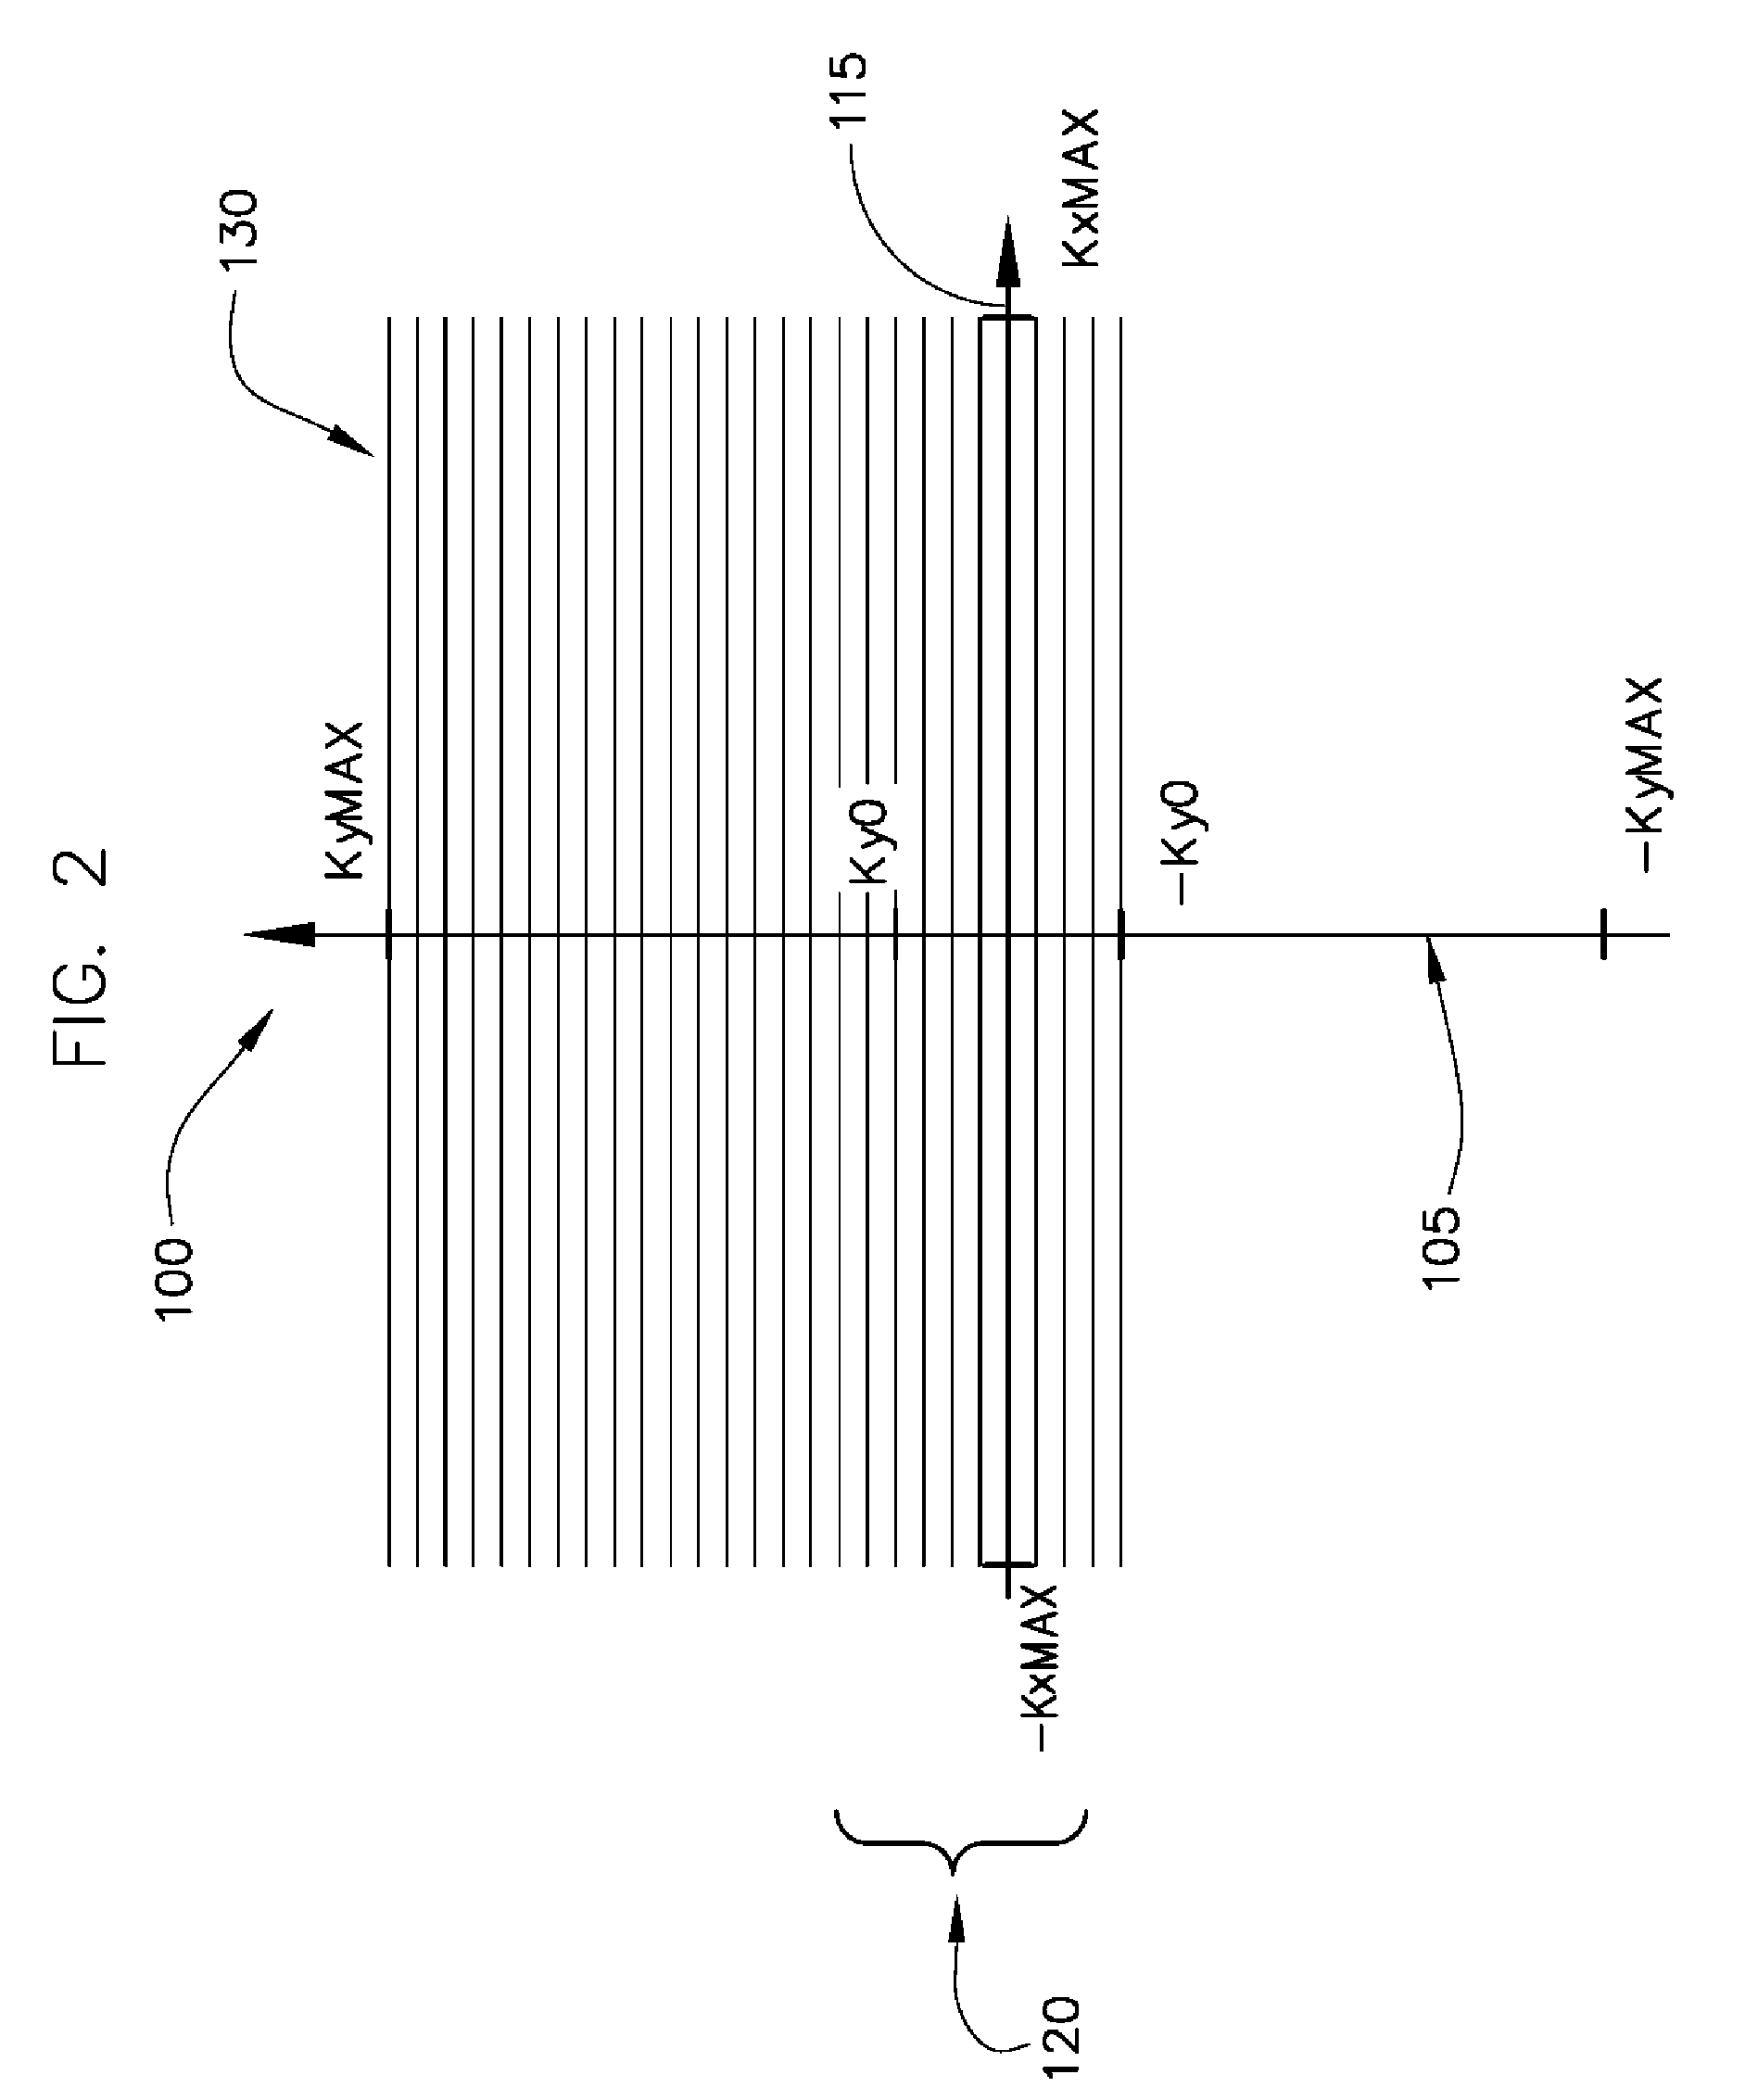 System and method for reducing MR scan time using partial fourier acquisition and compressed sensing